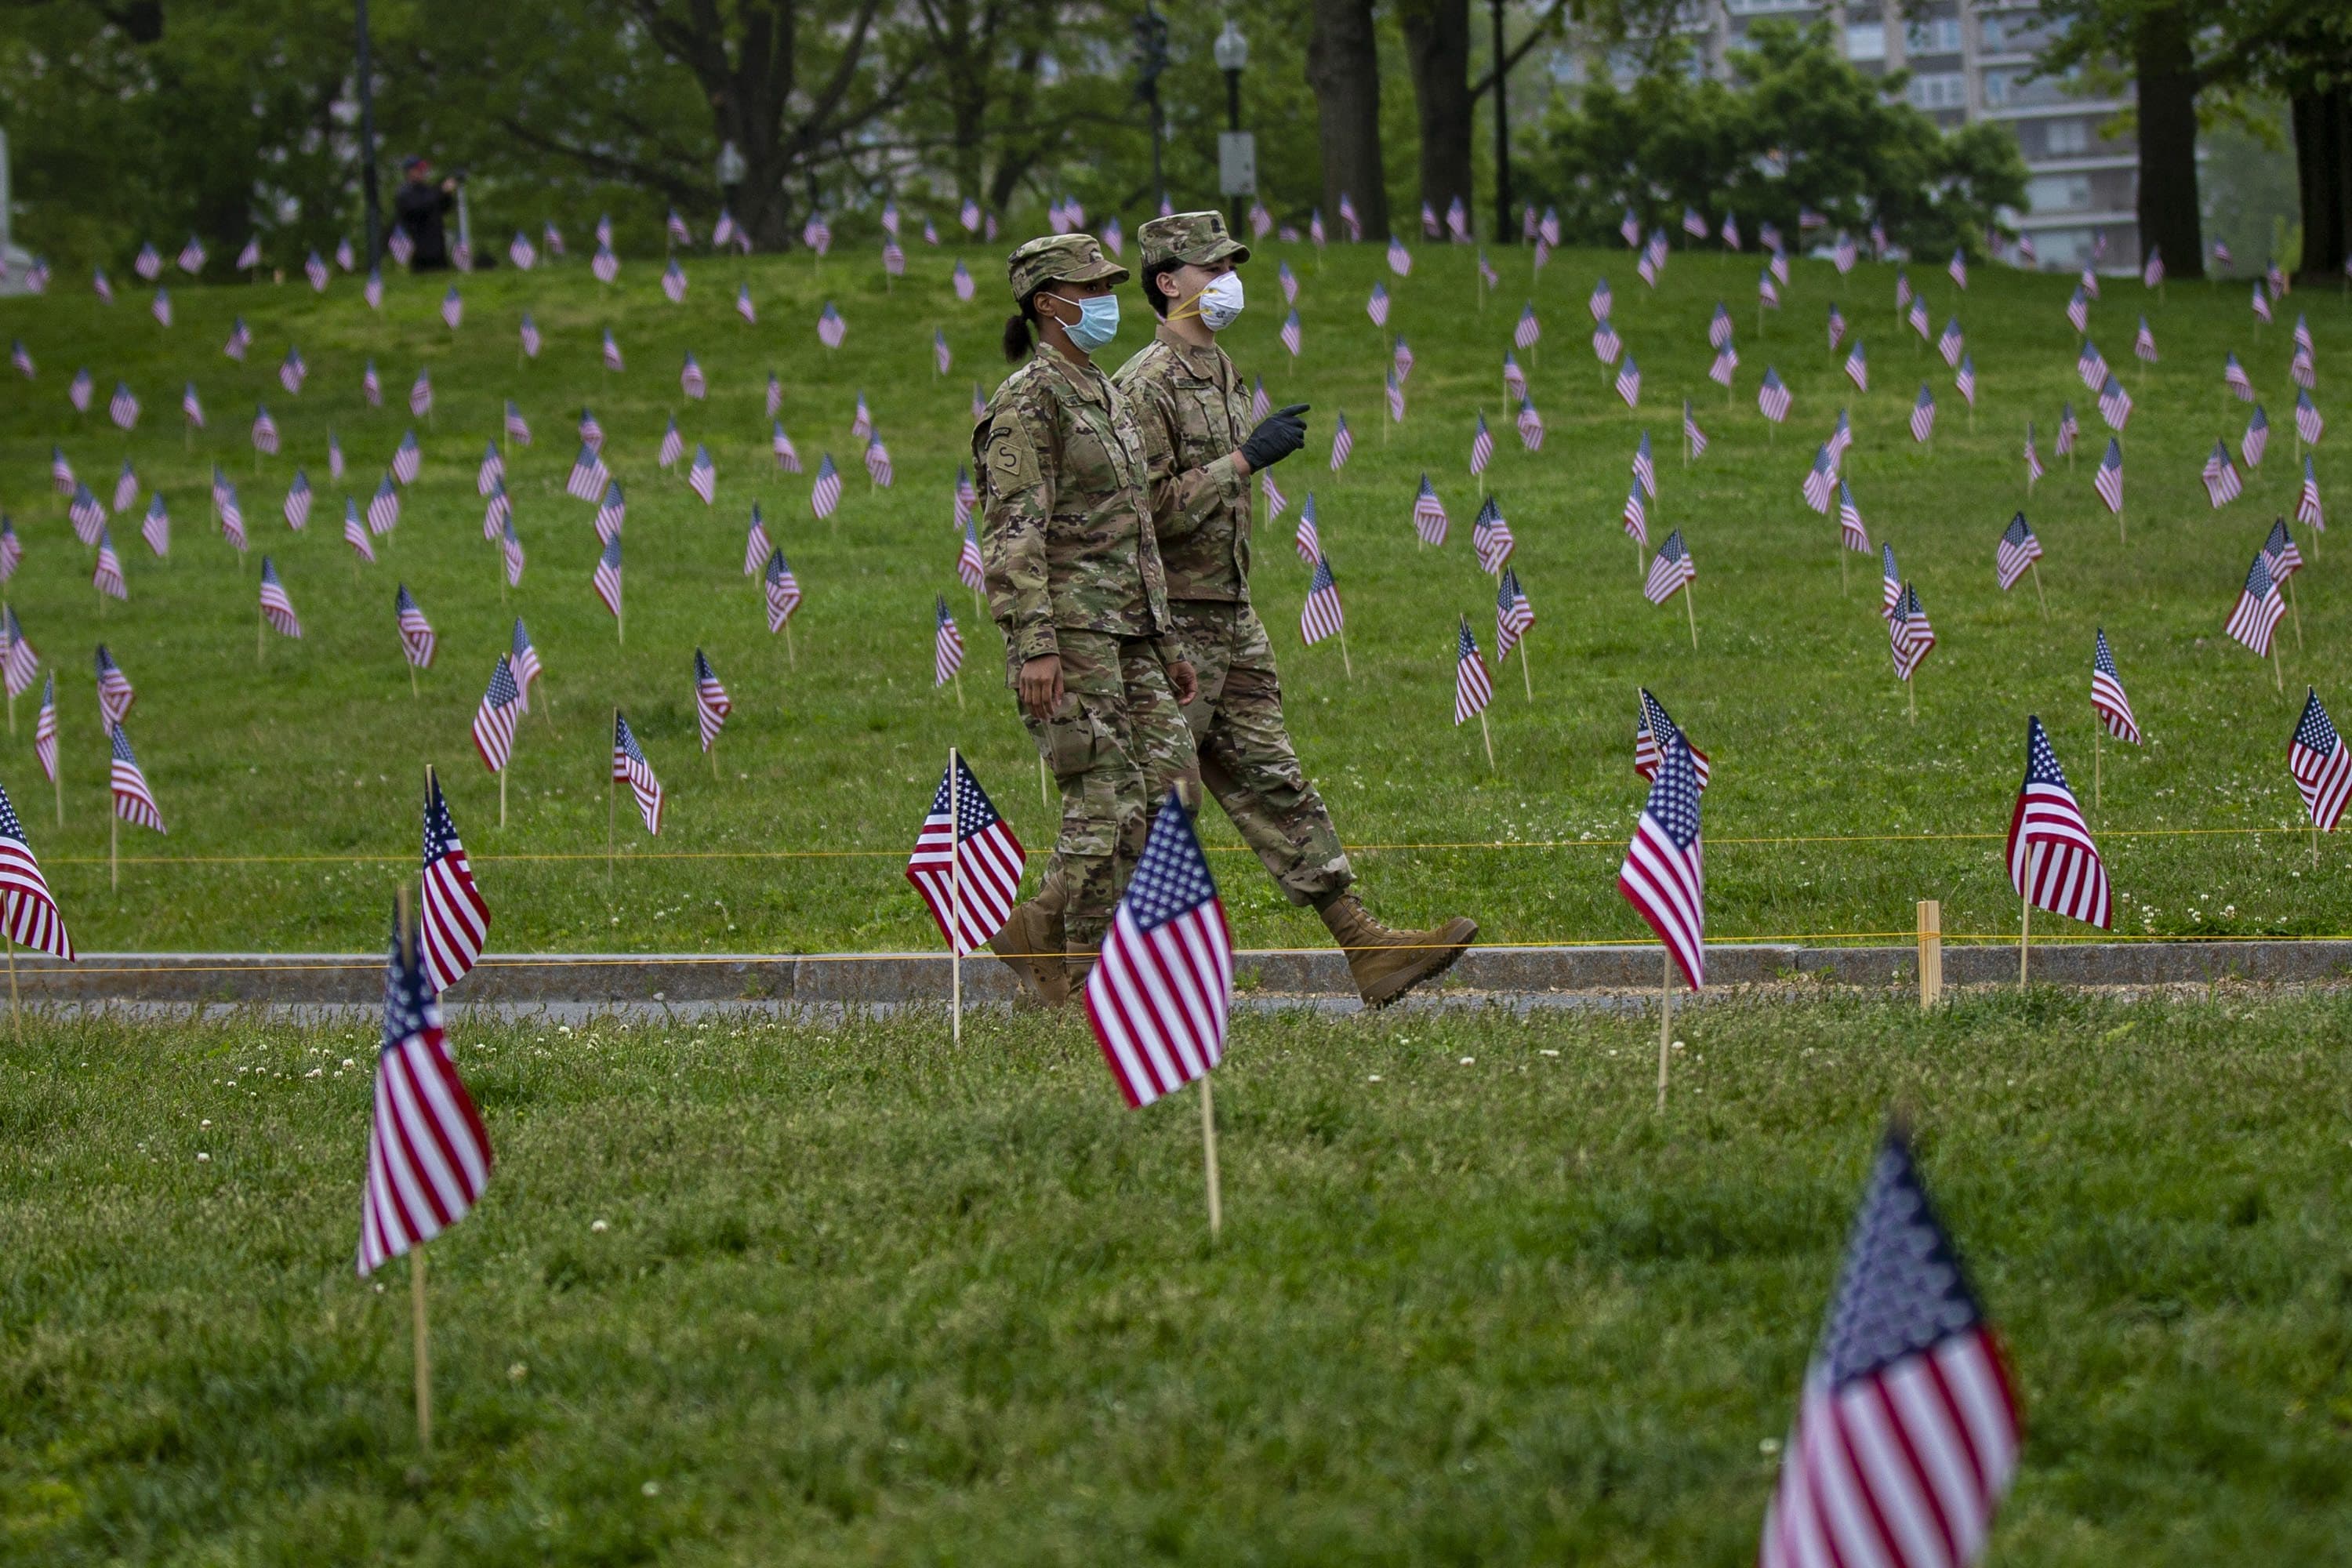 Lania Fitzparick and Goeorge Infante, members of the South Boston High School Junior ROTC, walk down a path through the flags planted at Boston Common honoring Mass. veterans who have died during war times. (Jesse Costa/WBUR)